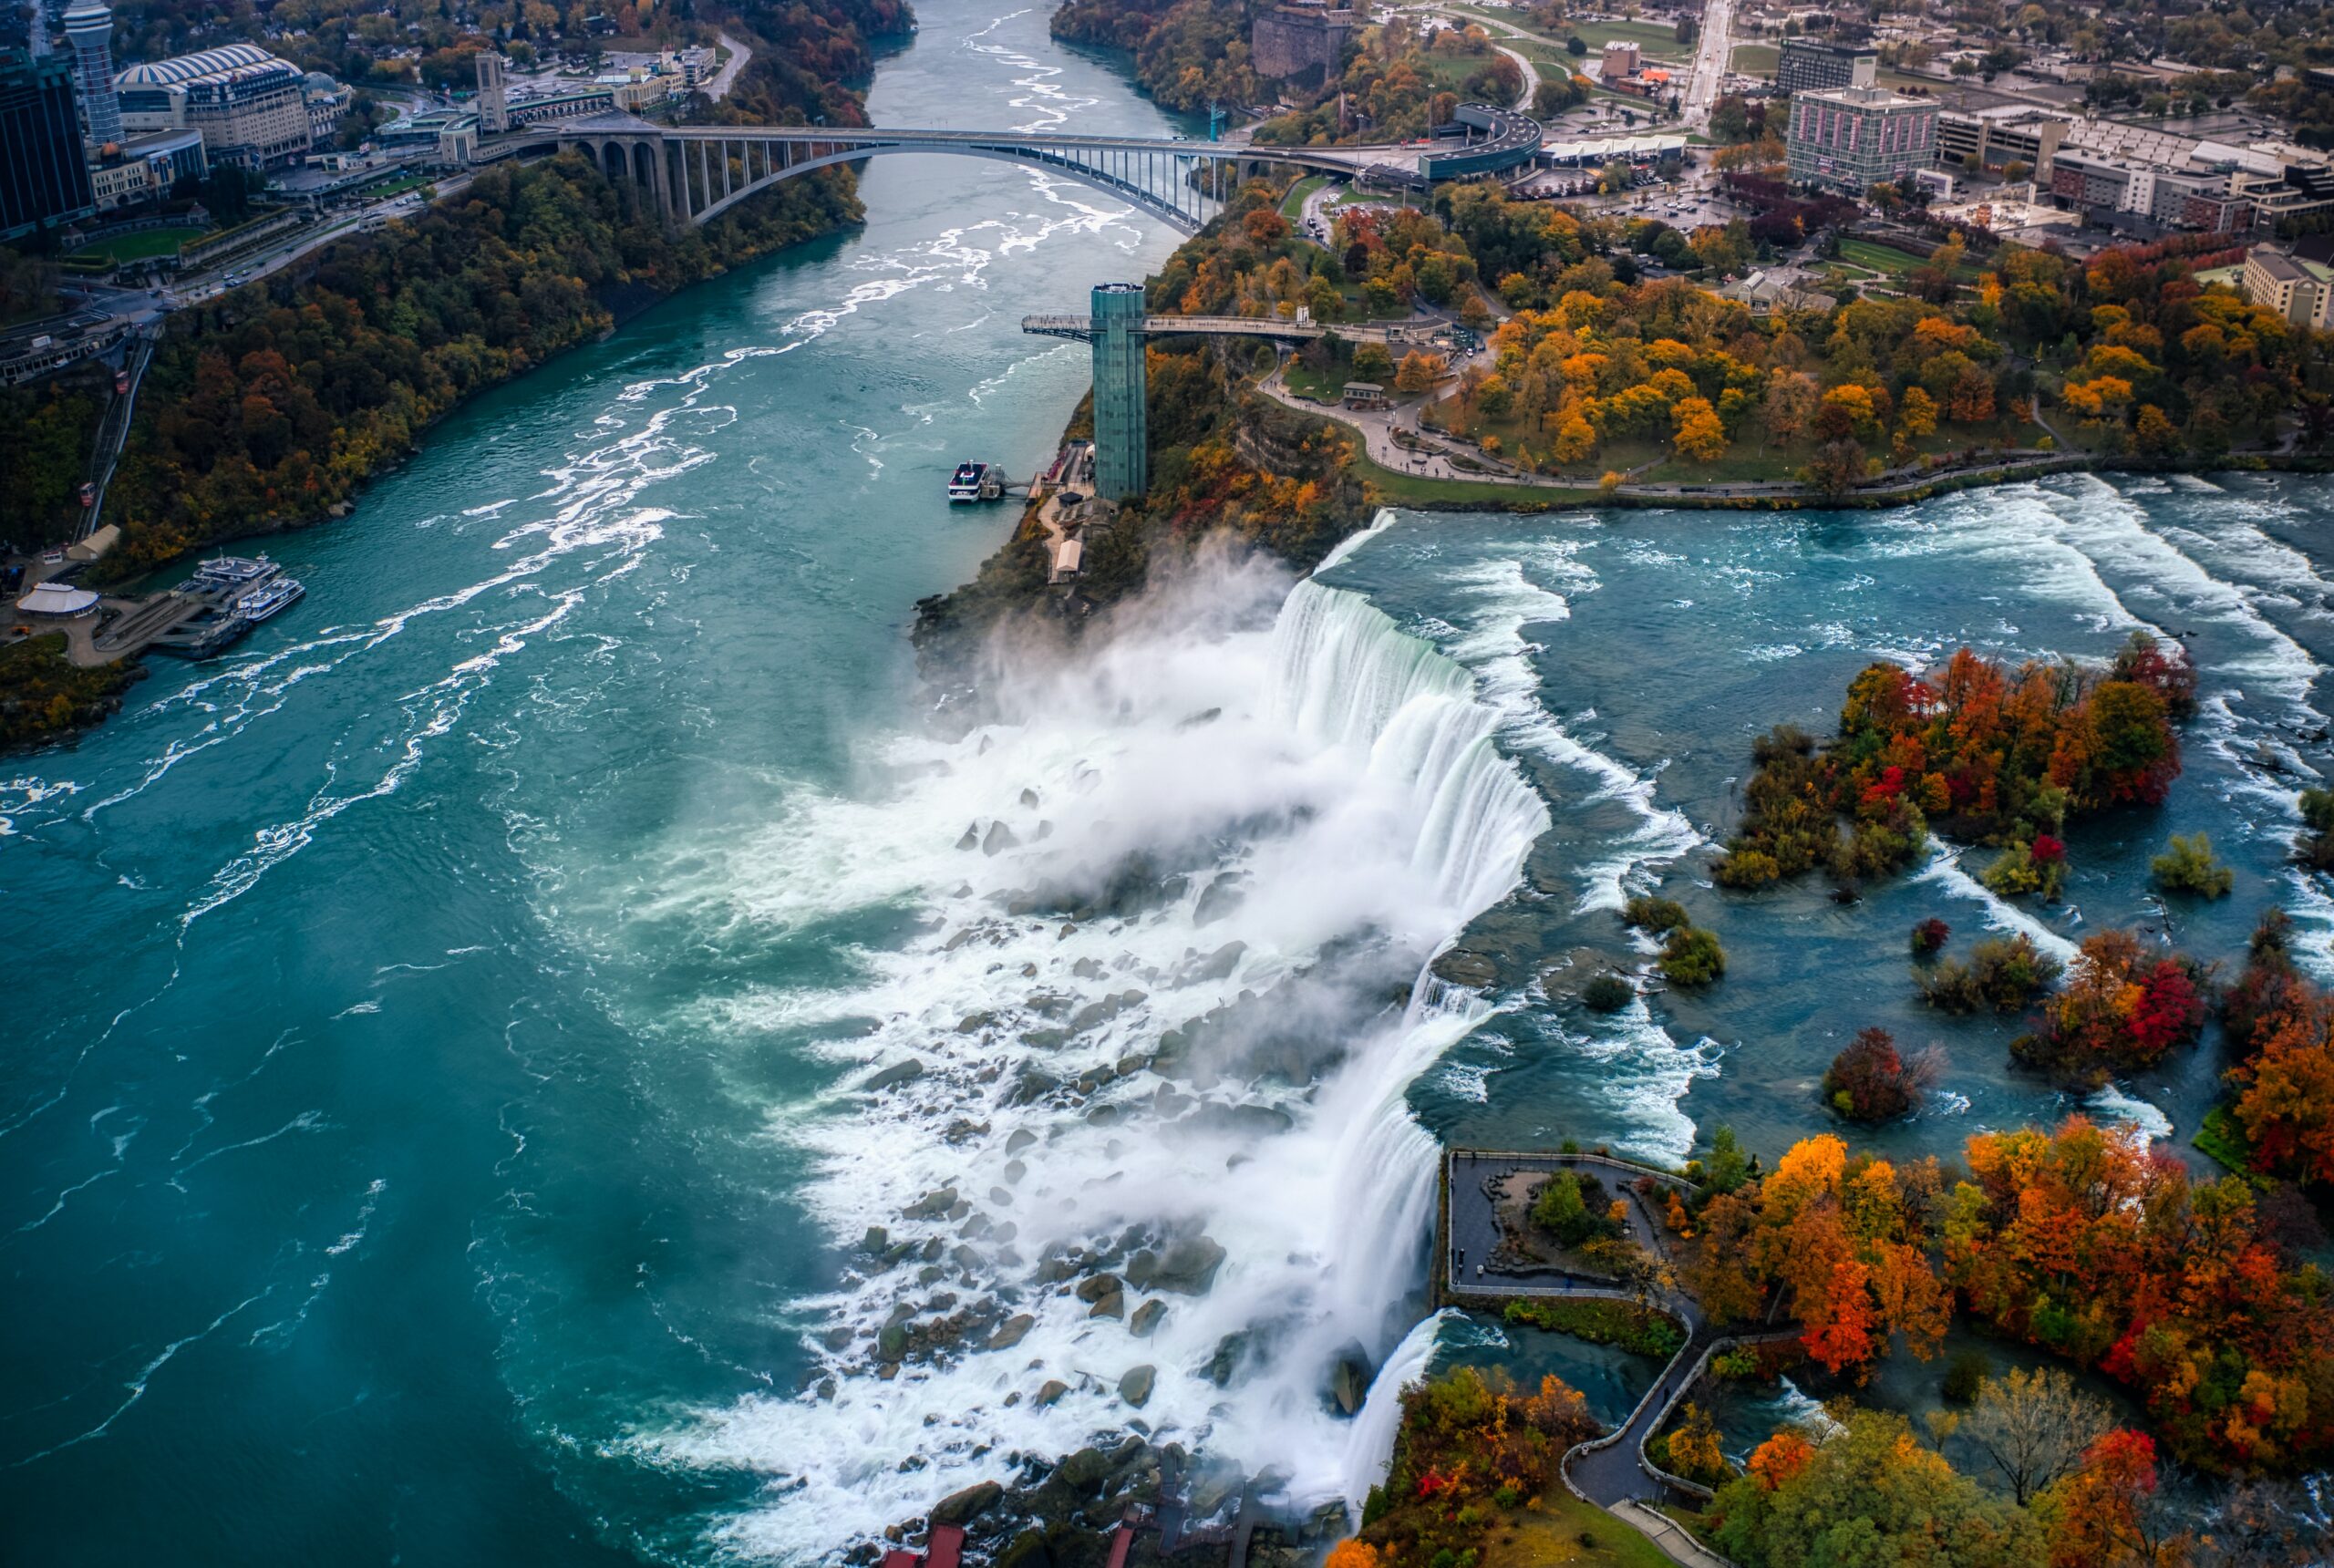 Water tumbles of the top of Niagara Falls in the autumn. The picture is an aerial shot and the falls are surrounded by fall foliage